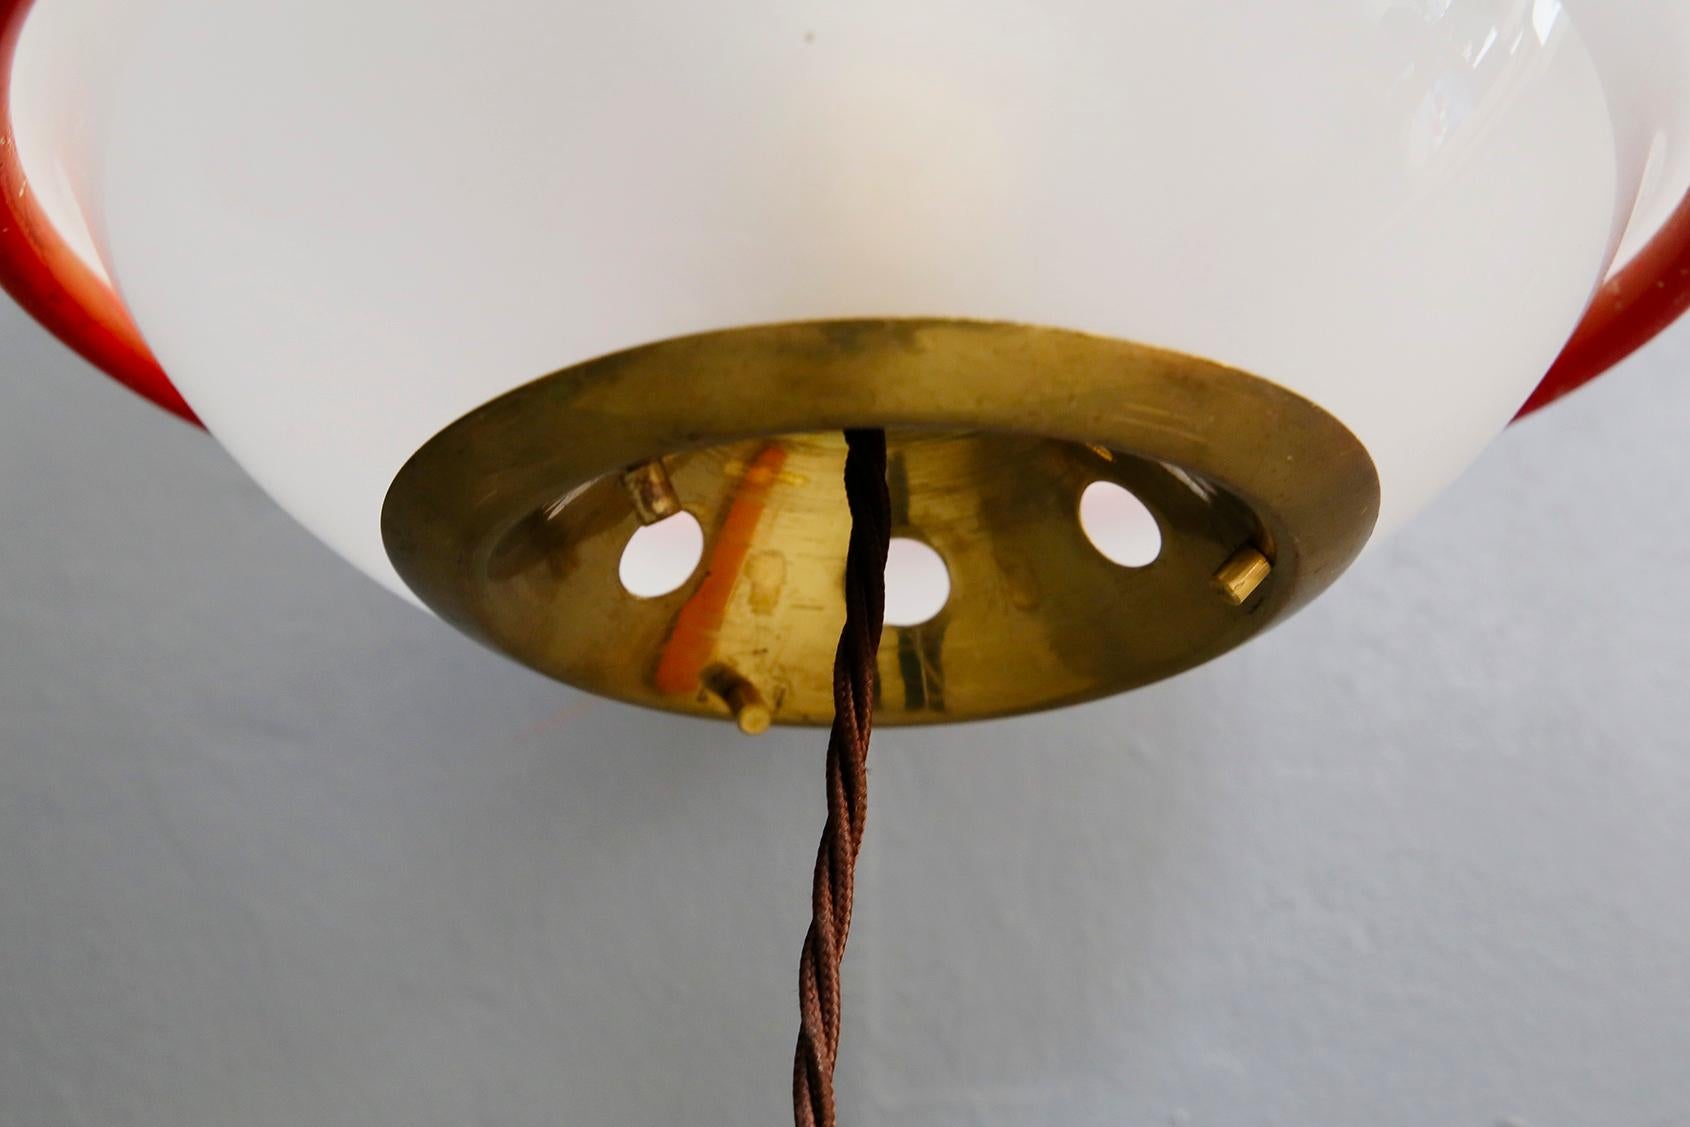 Mid-20th Century Gino Sarfatti Wall Lamp for Arteluce in Red Aluminium and Glass, Published 1950s